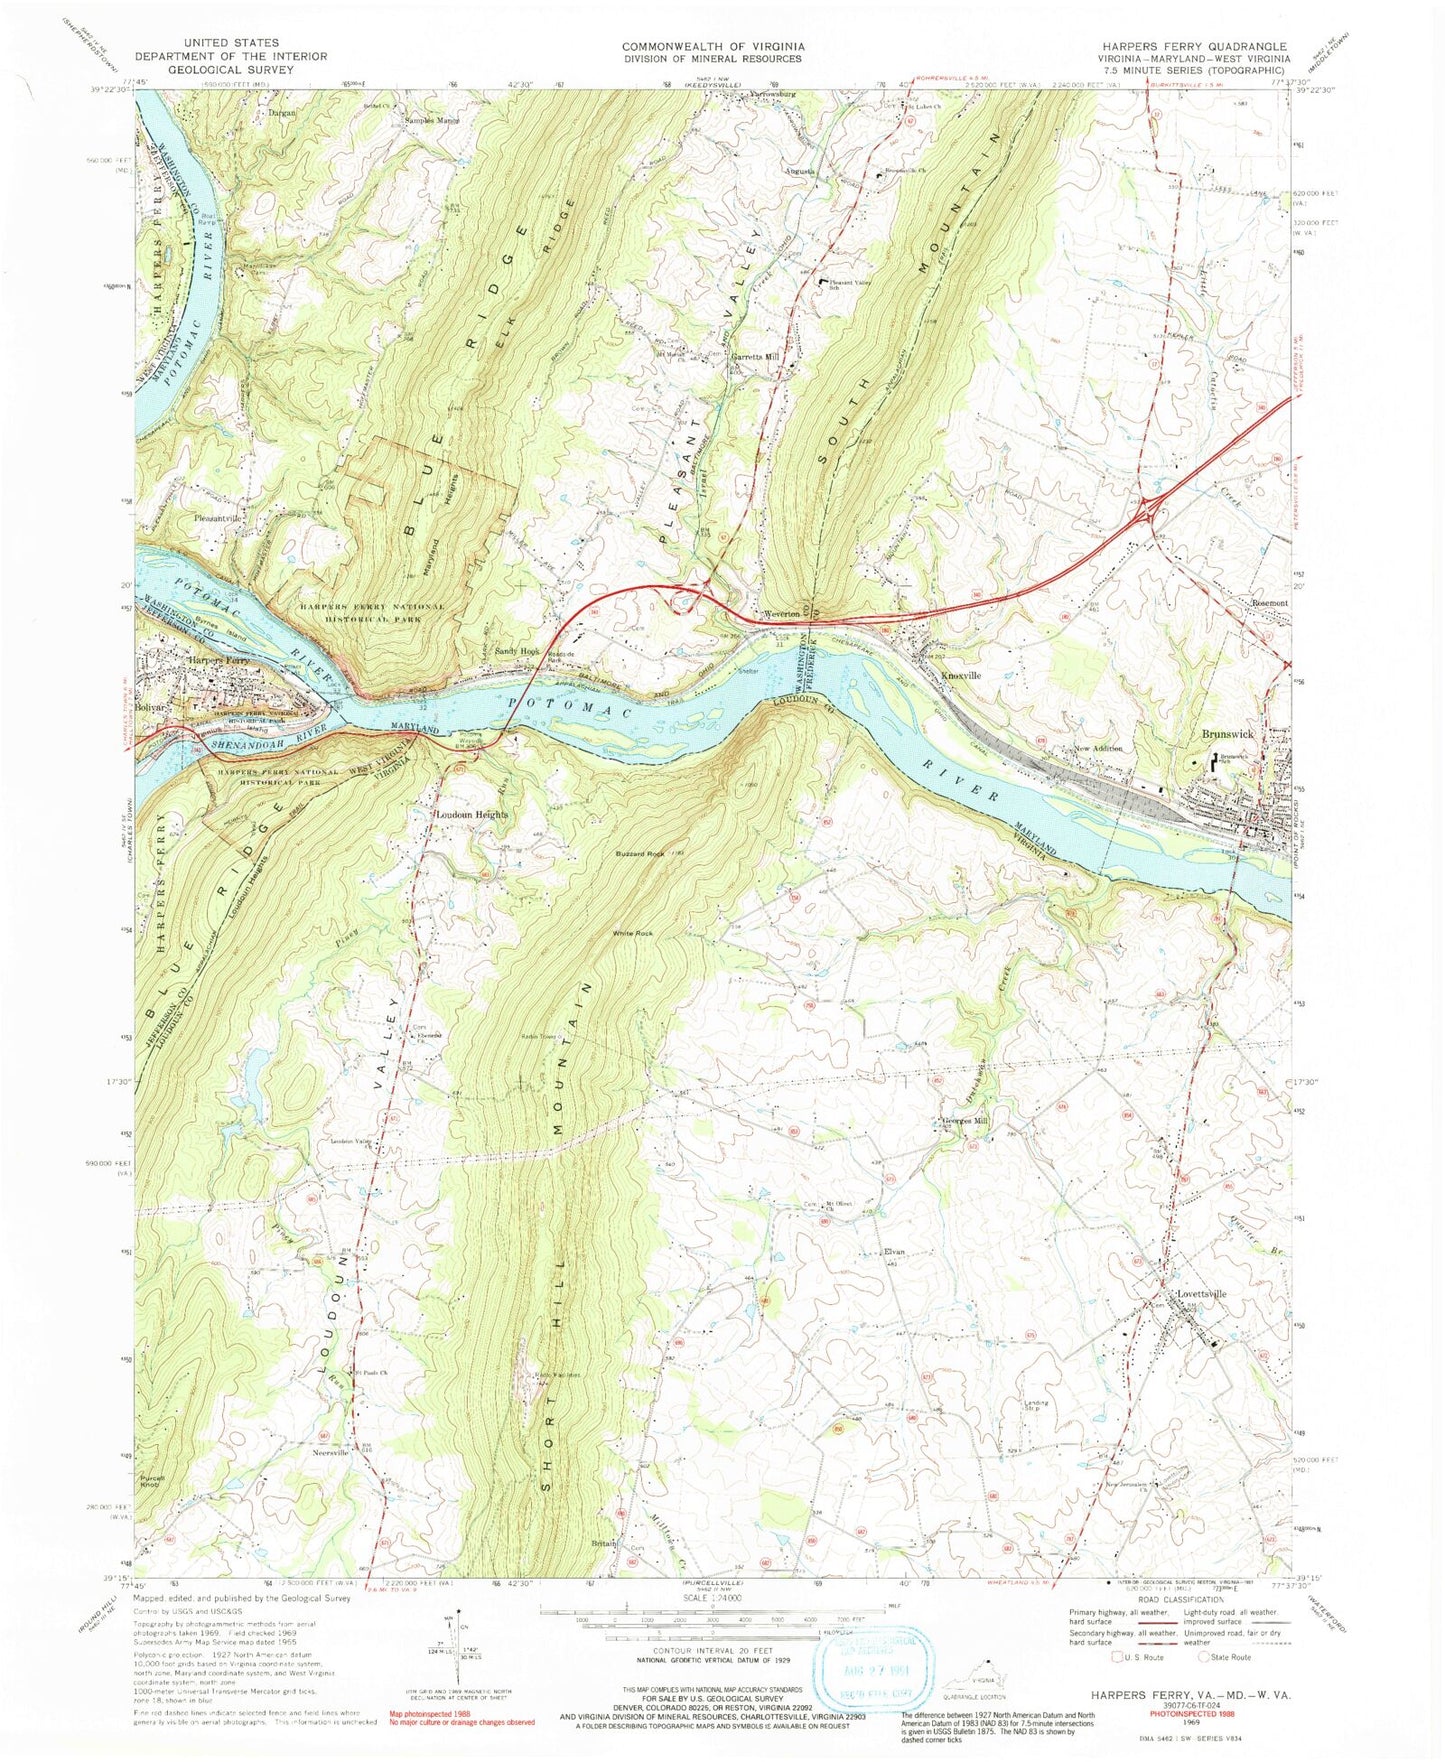 USGS Classic Harpers Ferry West Virginia 7.5'x7.5' Topo Map Image